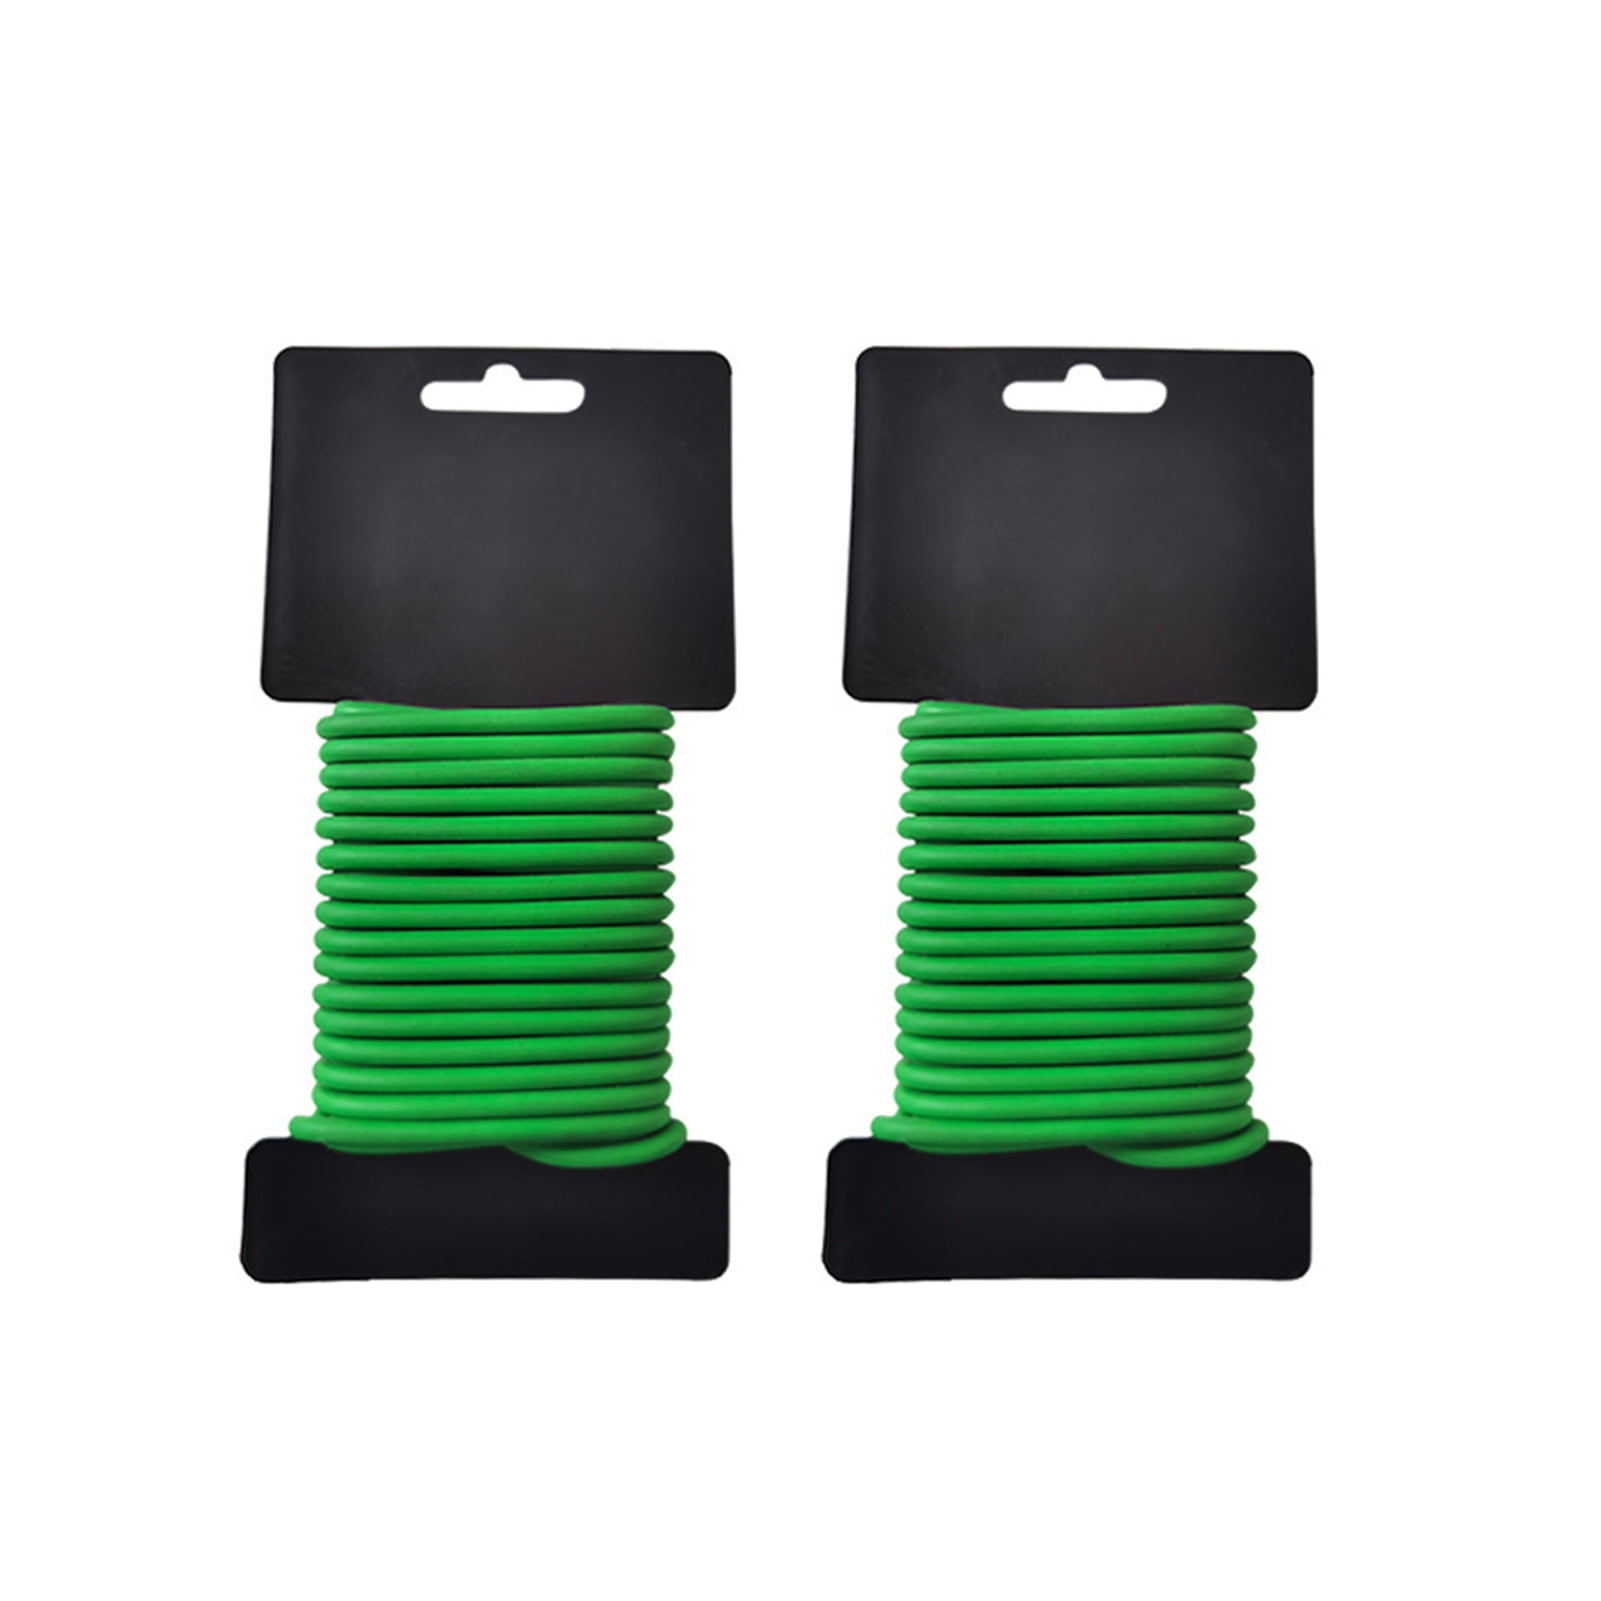 2pcs Garden Plant Twist Ties Wire to Fix Plant and Tie Rubber Coated Cable 